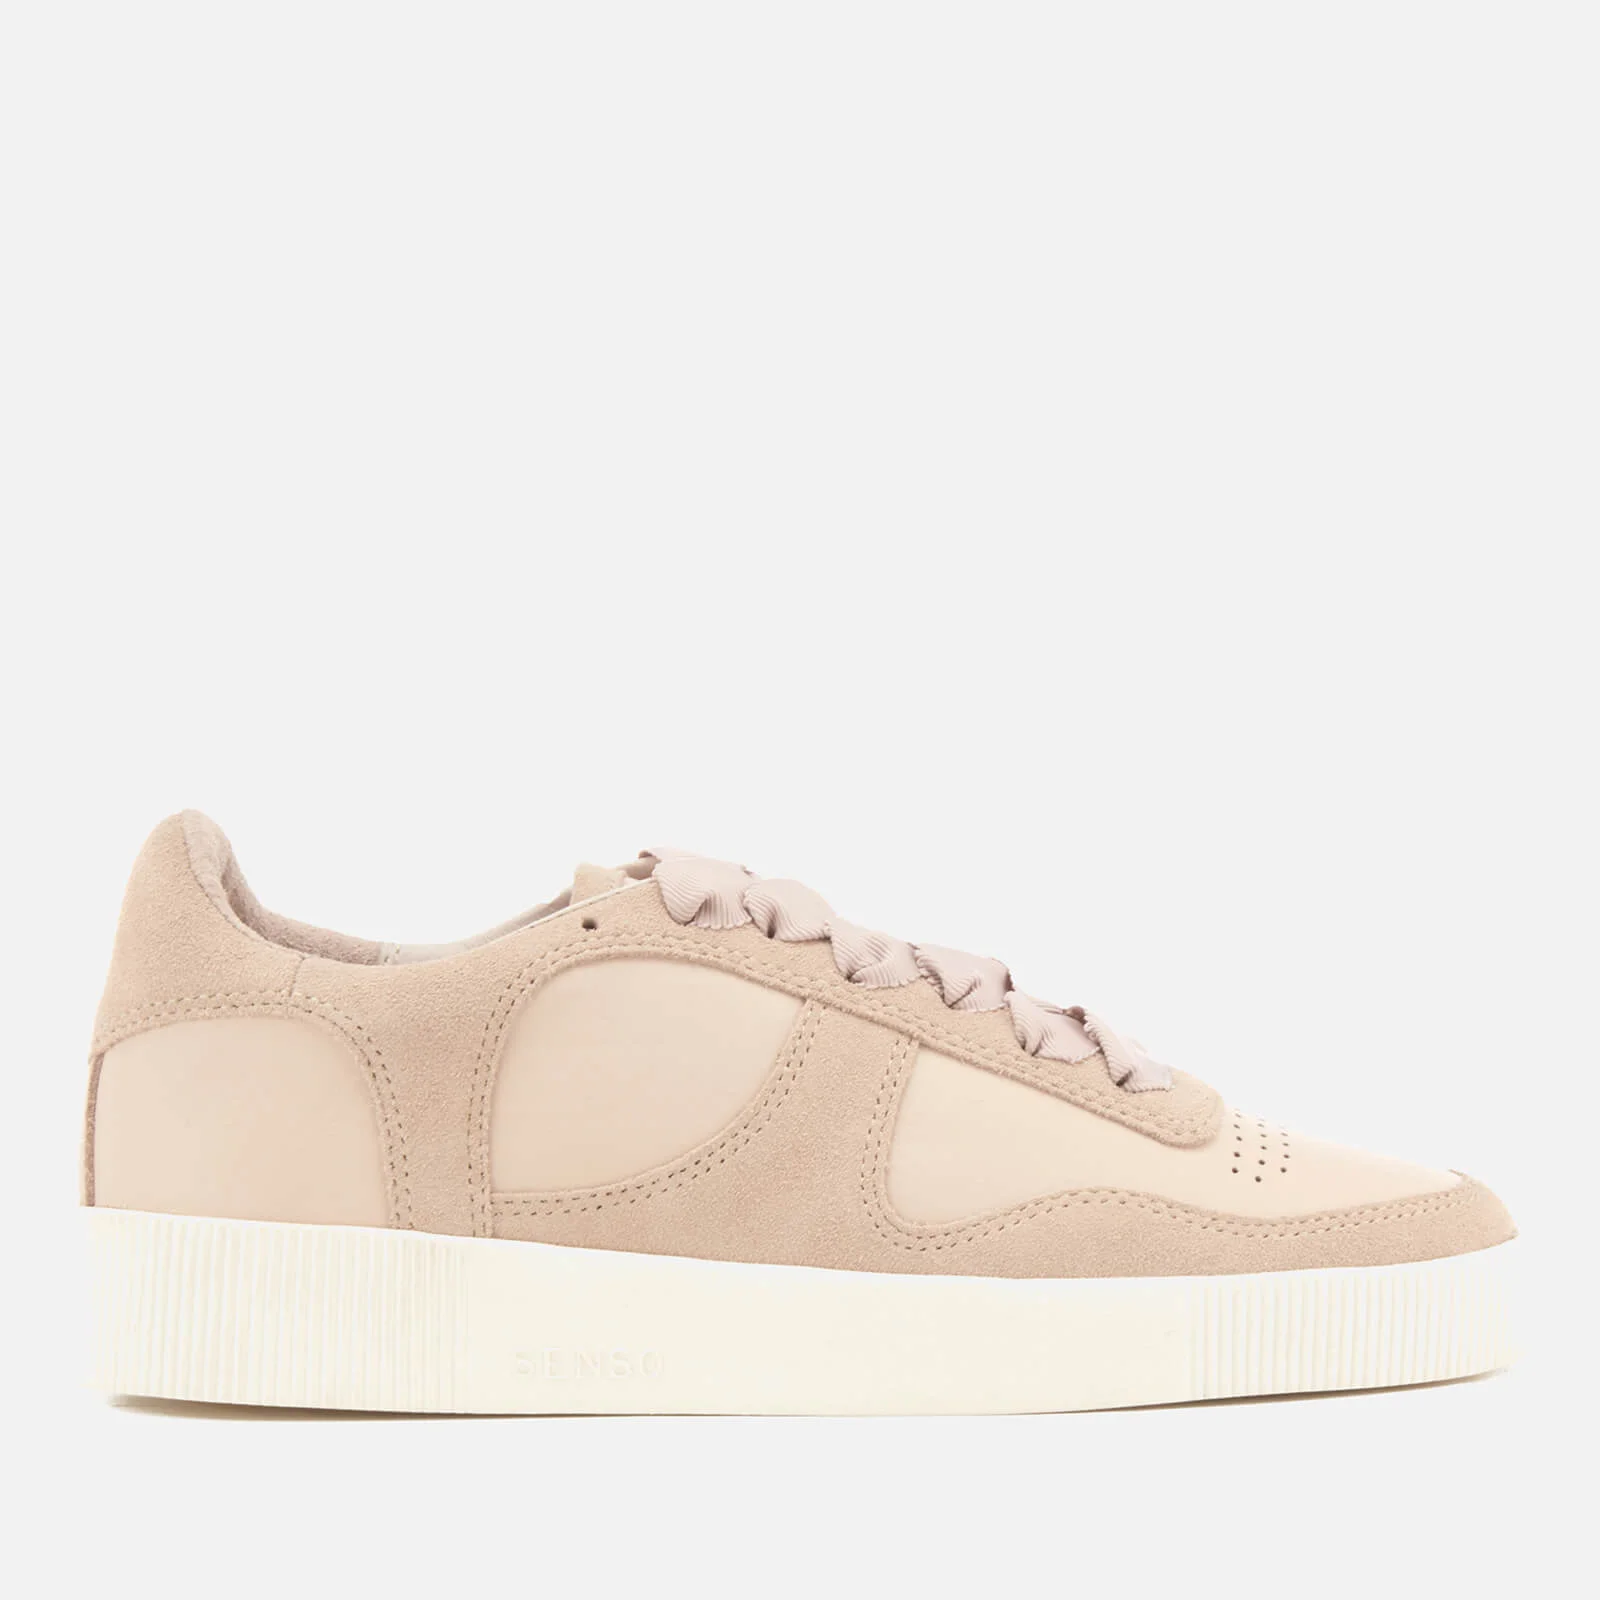 Senso Women's Amelie Leather/Suede Low Top Trainers - Peach Image 1